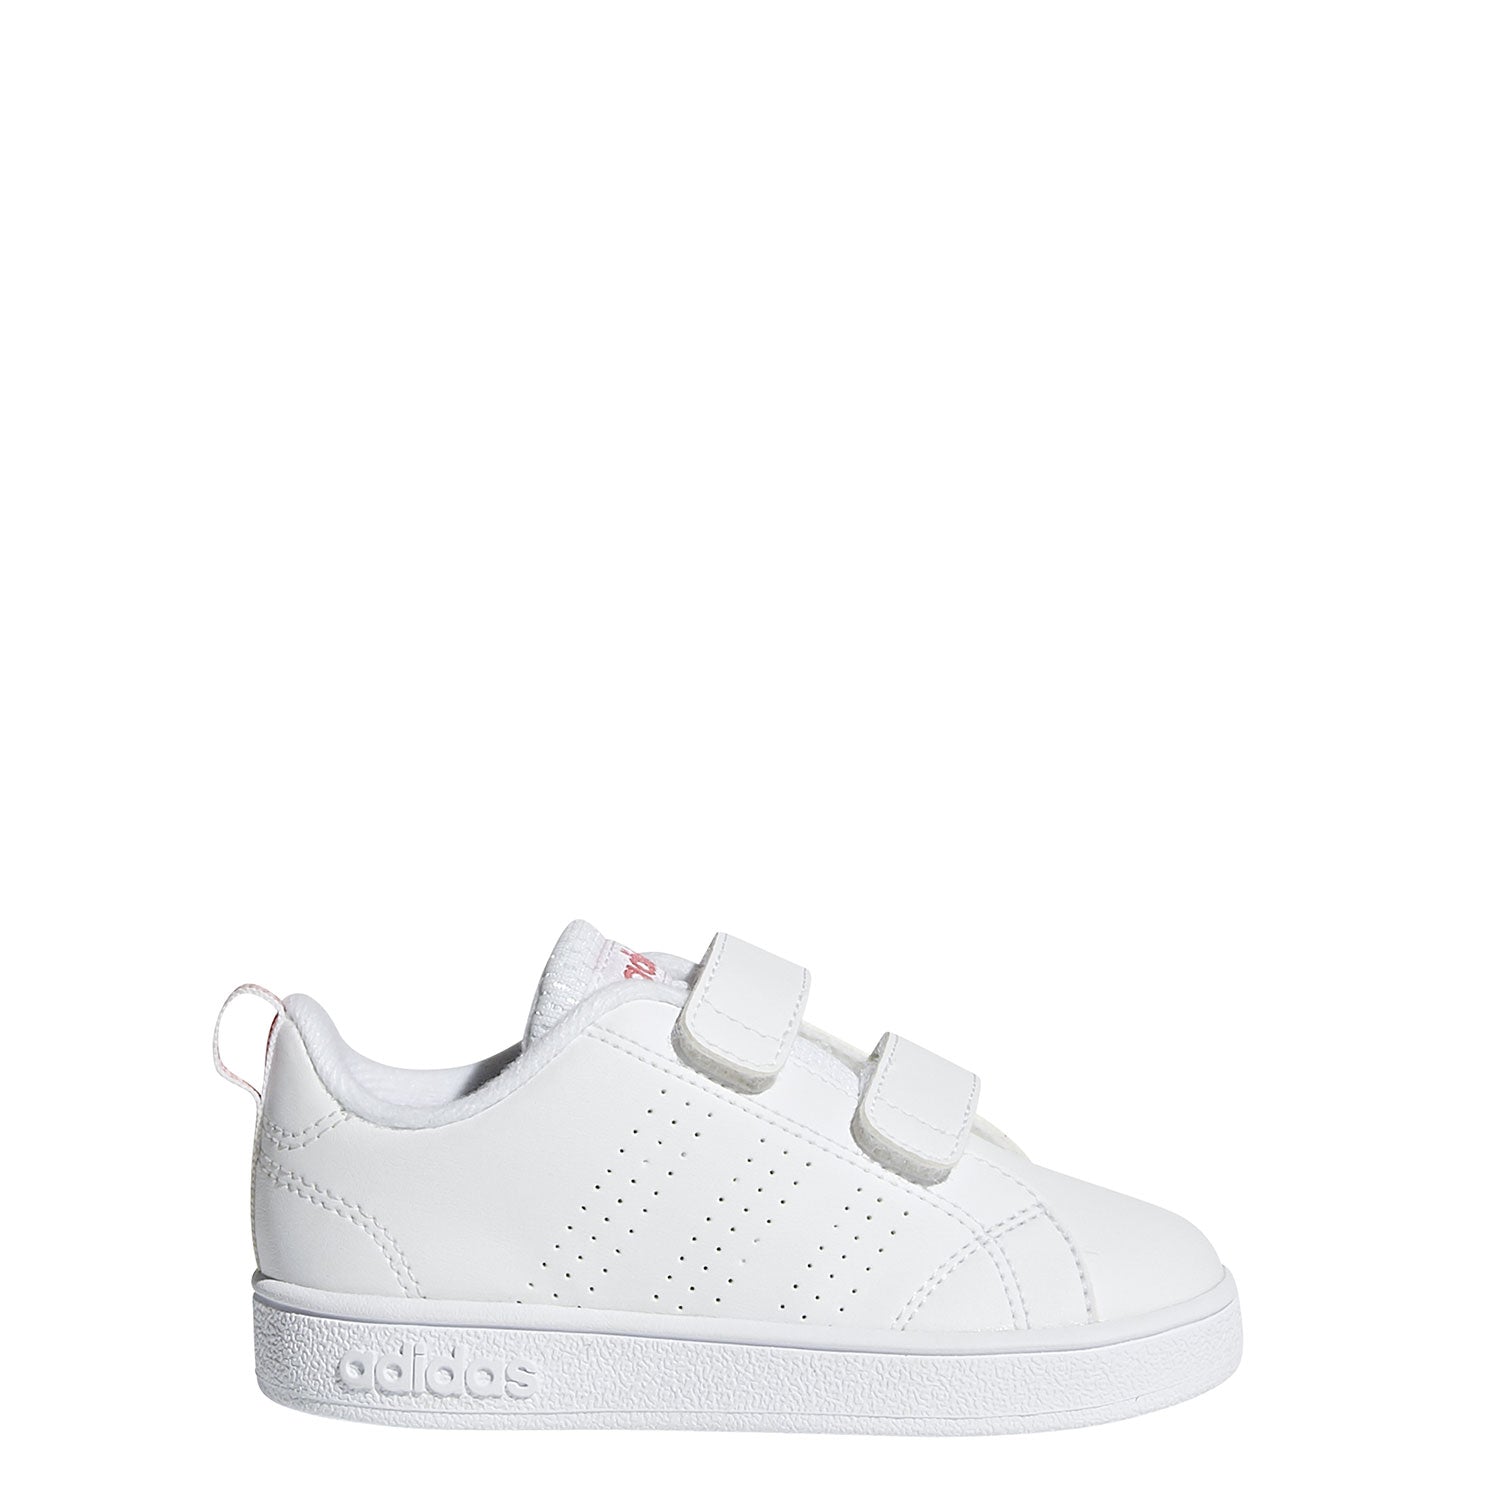 adidas neo kids shoes